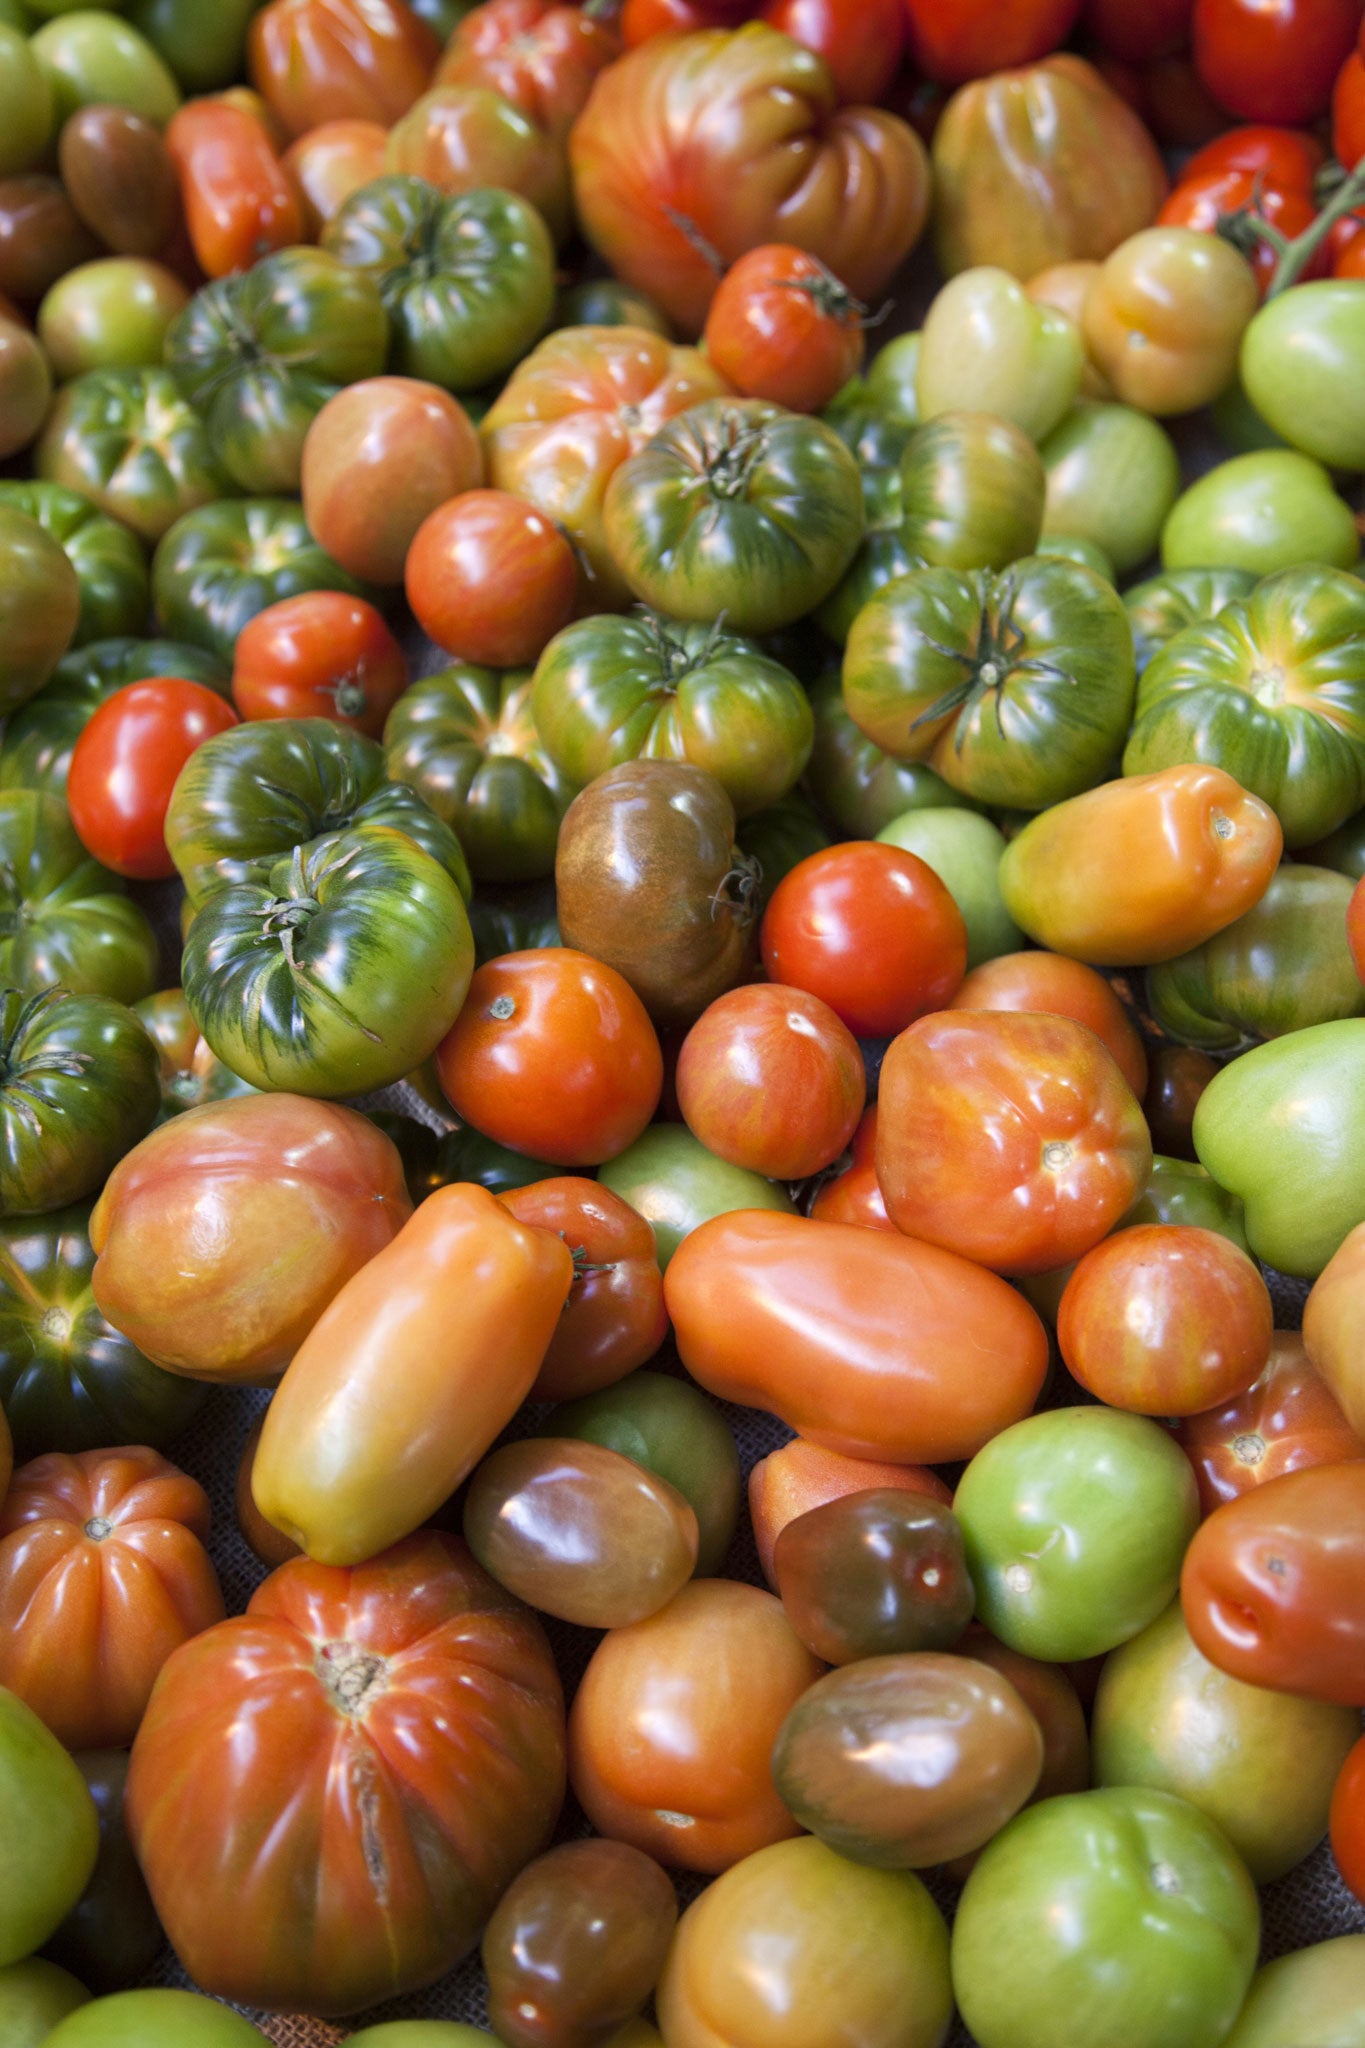 It's not too late to start tomatoes again, though plants will take at least a month longer to fruit